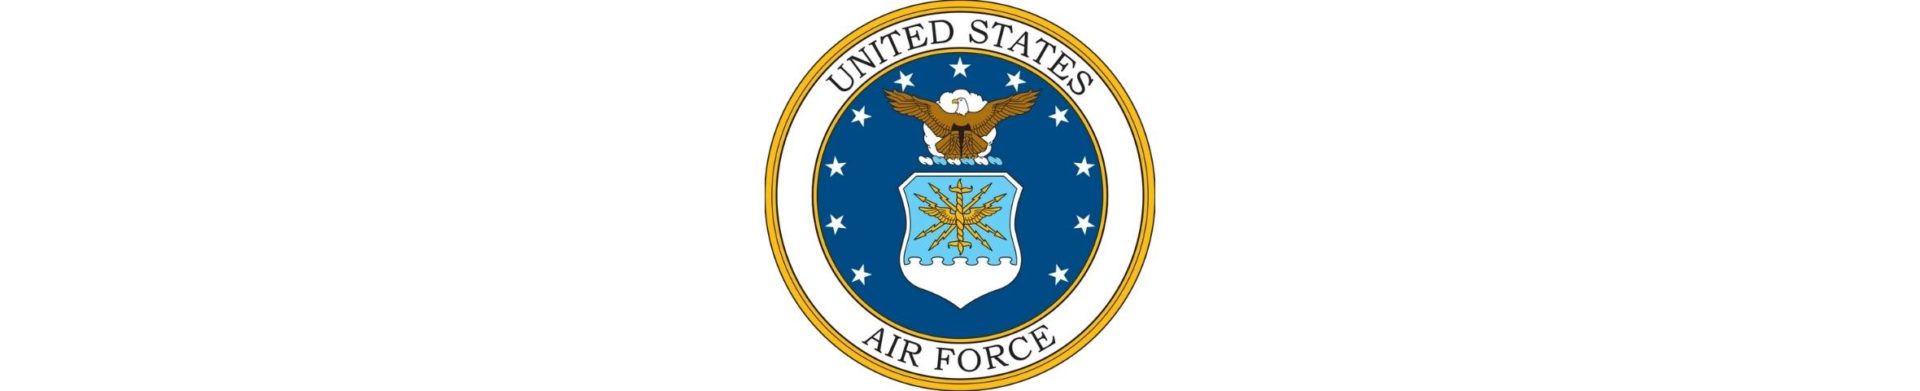 the US Air Force logo